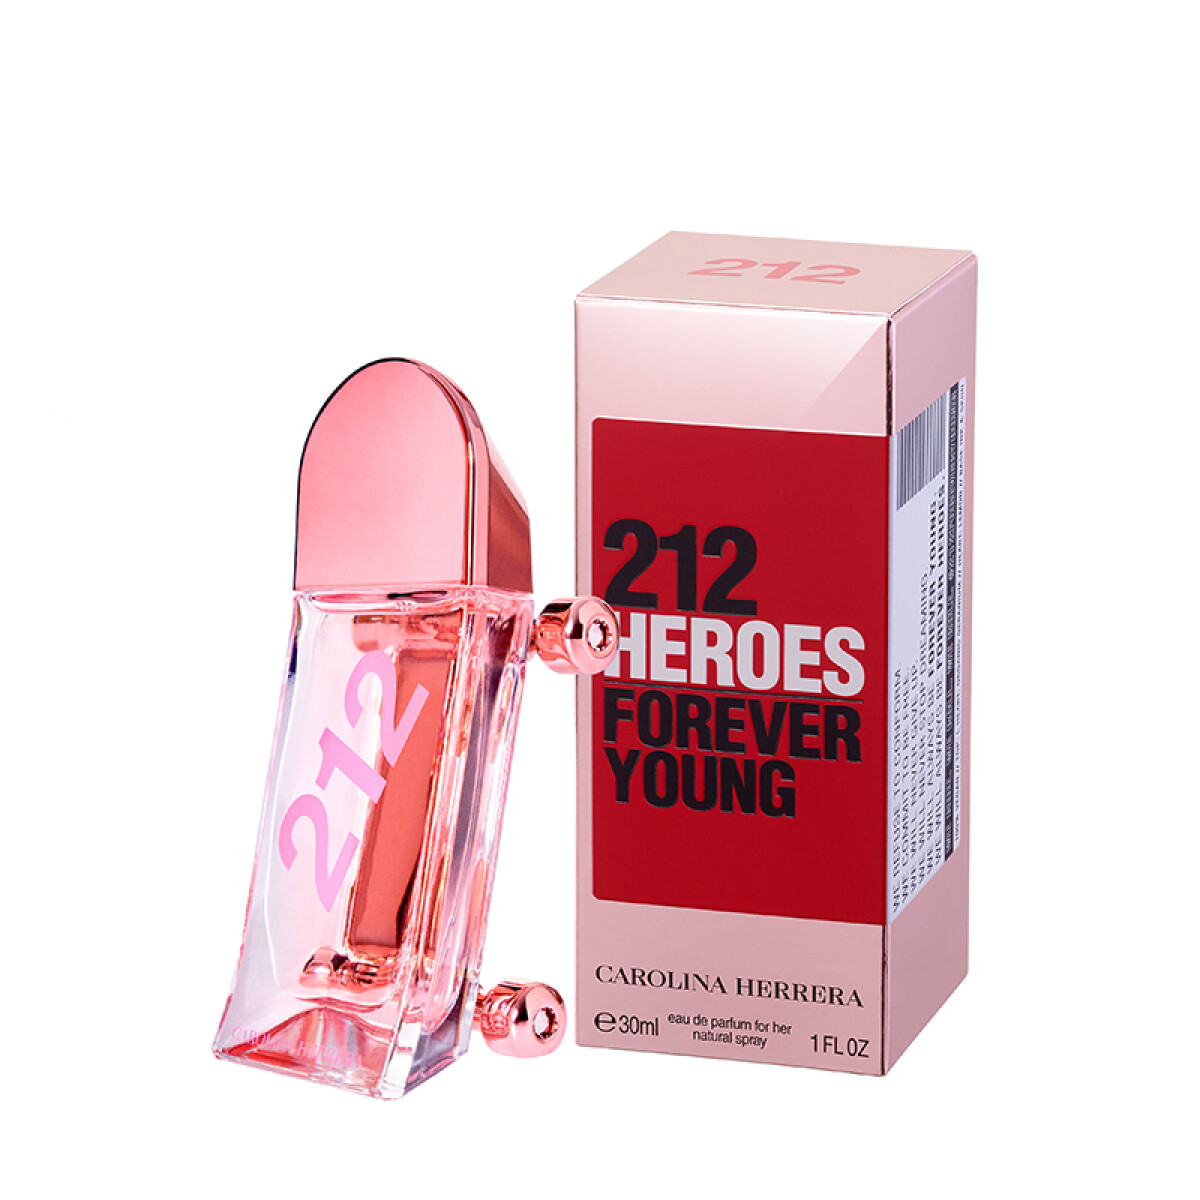 212 Heroes forever young for her Carolina Herrera - 30 ml 